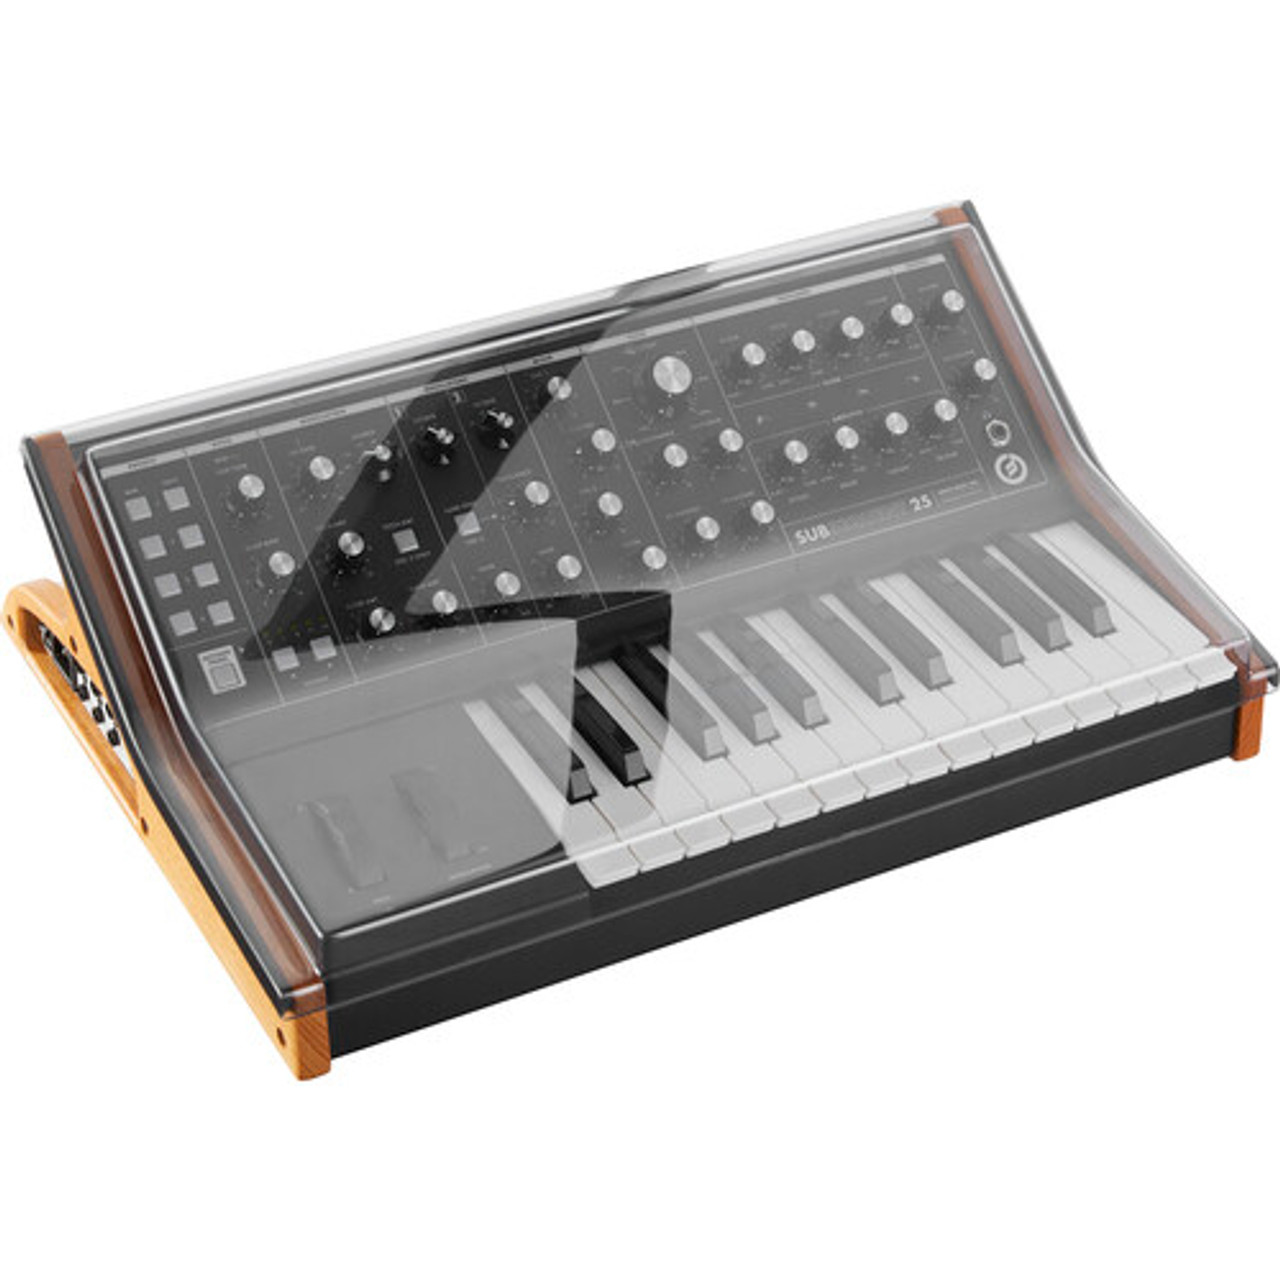 Decksaver Moog Subsequent 25/ Sub Phatty cover (SOFT-FIT SIDES)